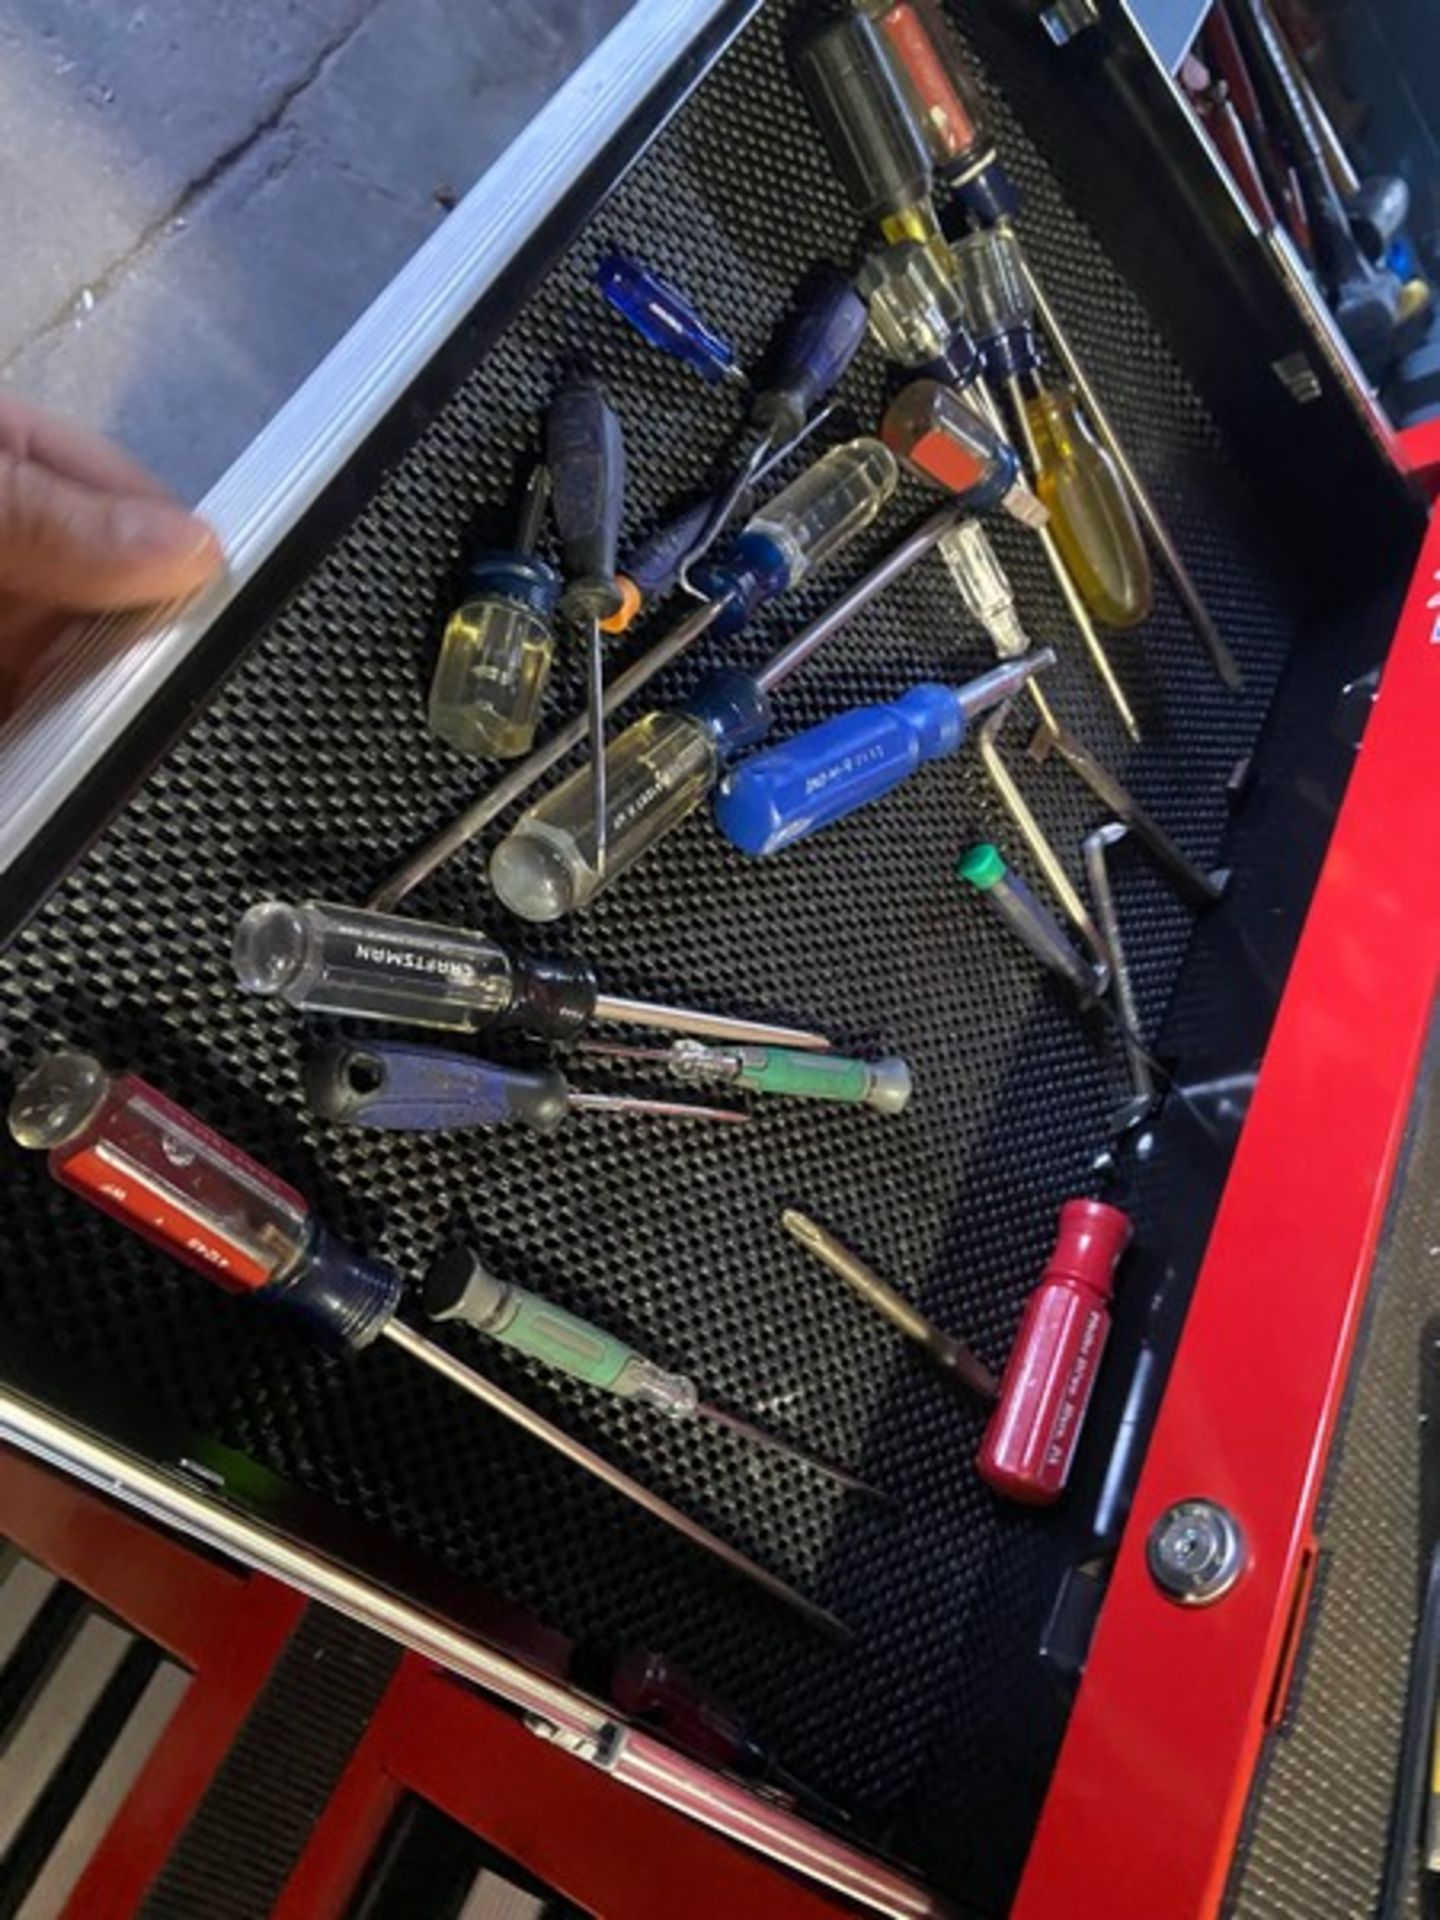 CRAFTSMAN PORTABLE TOOLBOX WITH CONTENTS, INCLUES MONKEY WRENCHES, WRENCHES, SCREW DRIVERS, & OTHER - Image 4 of 15